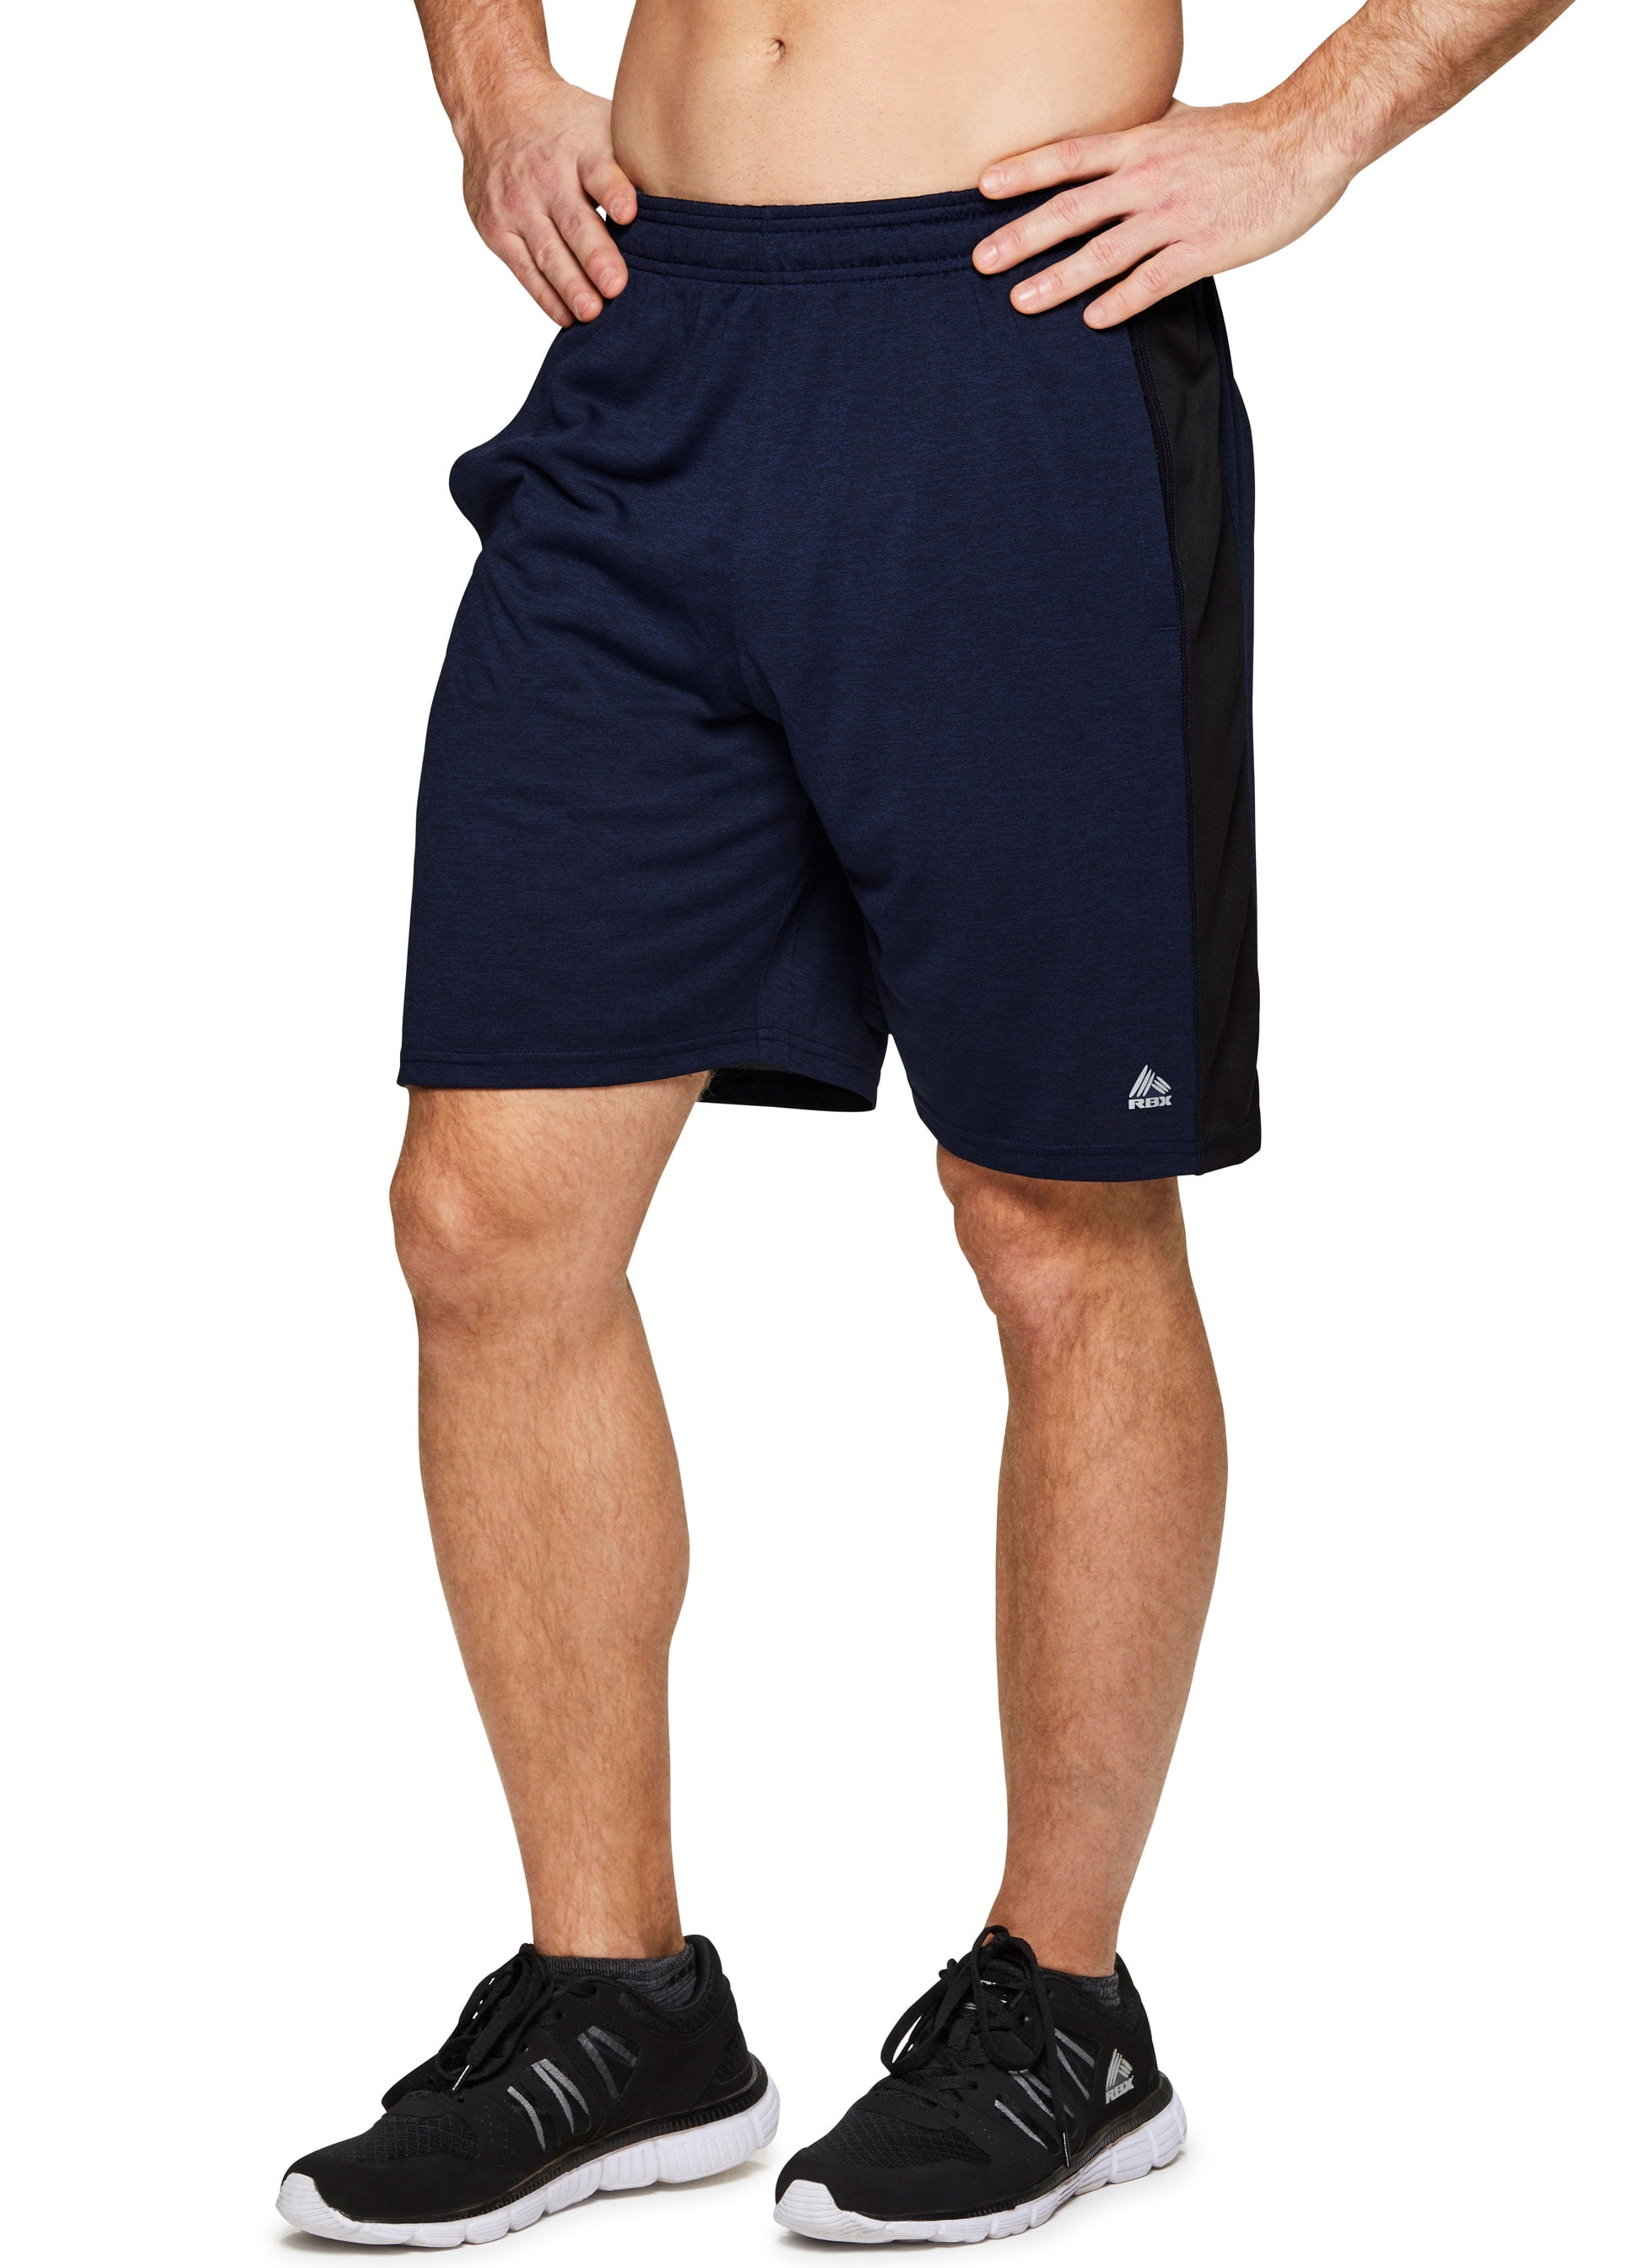 RBX Active Mens 9 in Workout Running Gym Athletic Shorts with Pockets ACRM5-9INSEAMSHORTS 